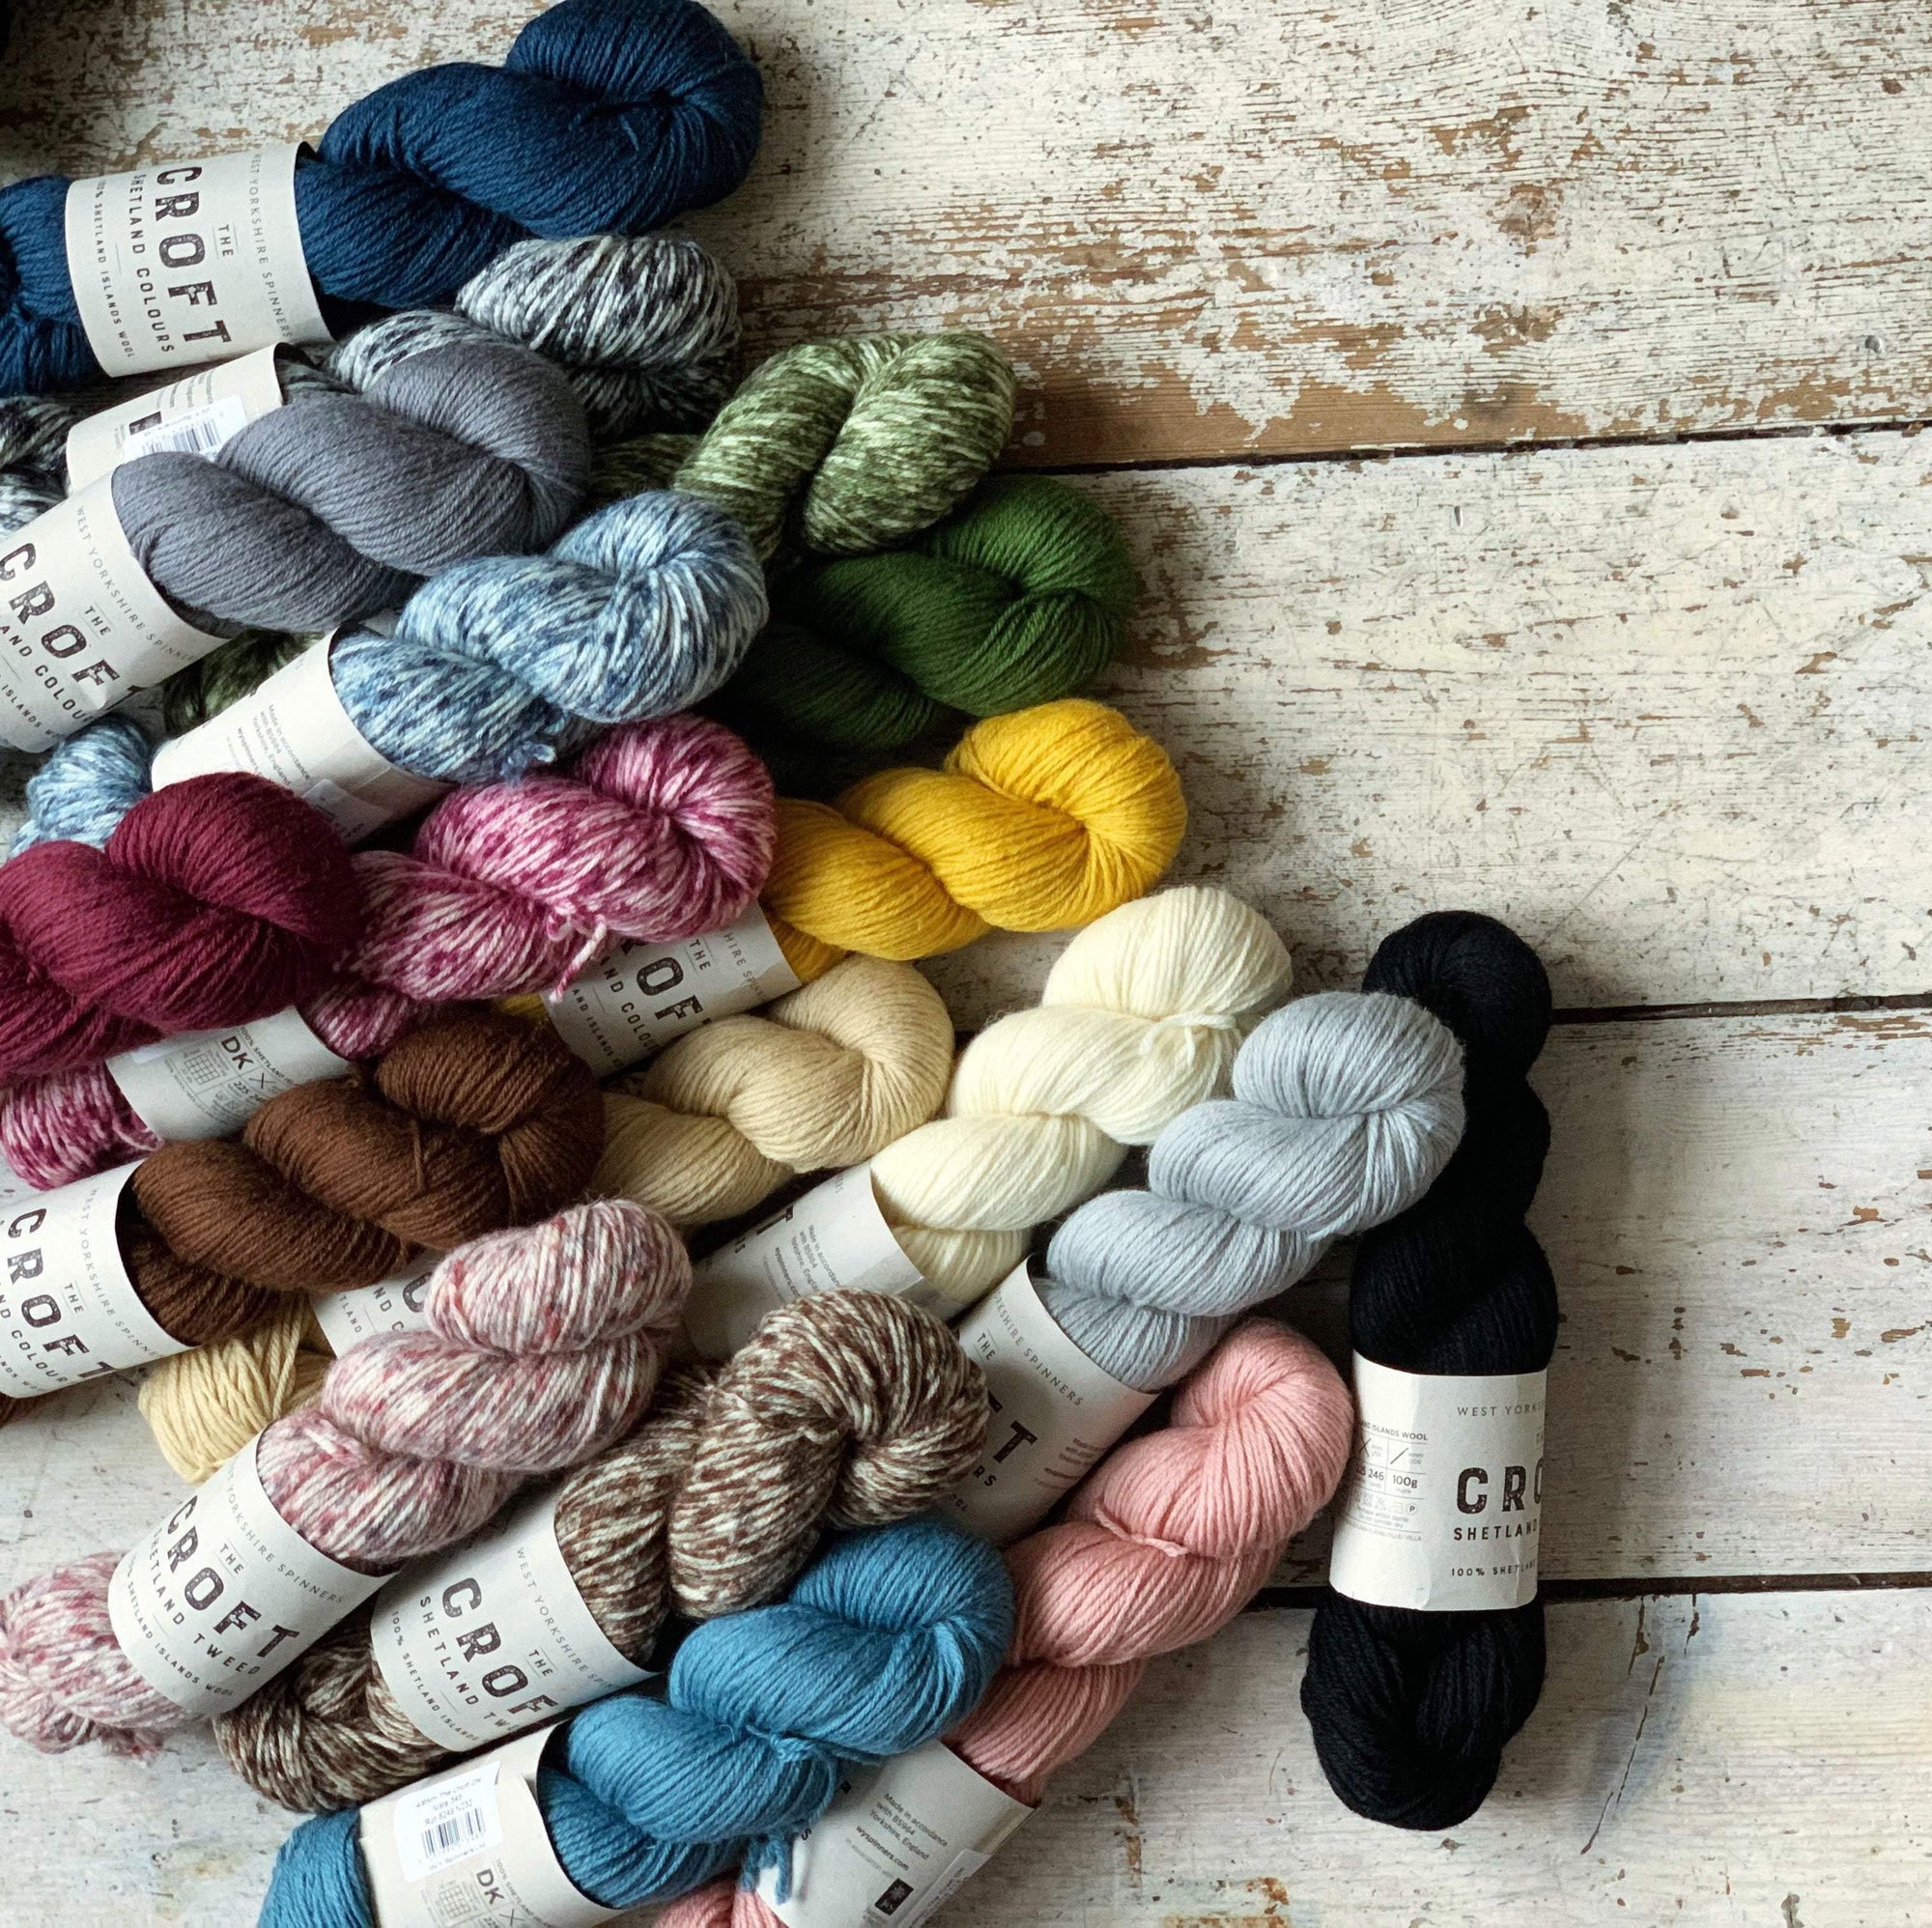 The Croft Shetland DK West Yorkshire Spinners